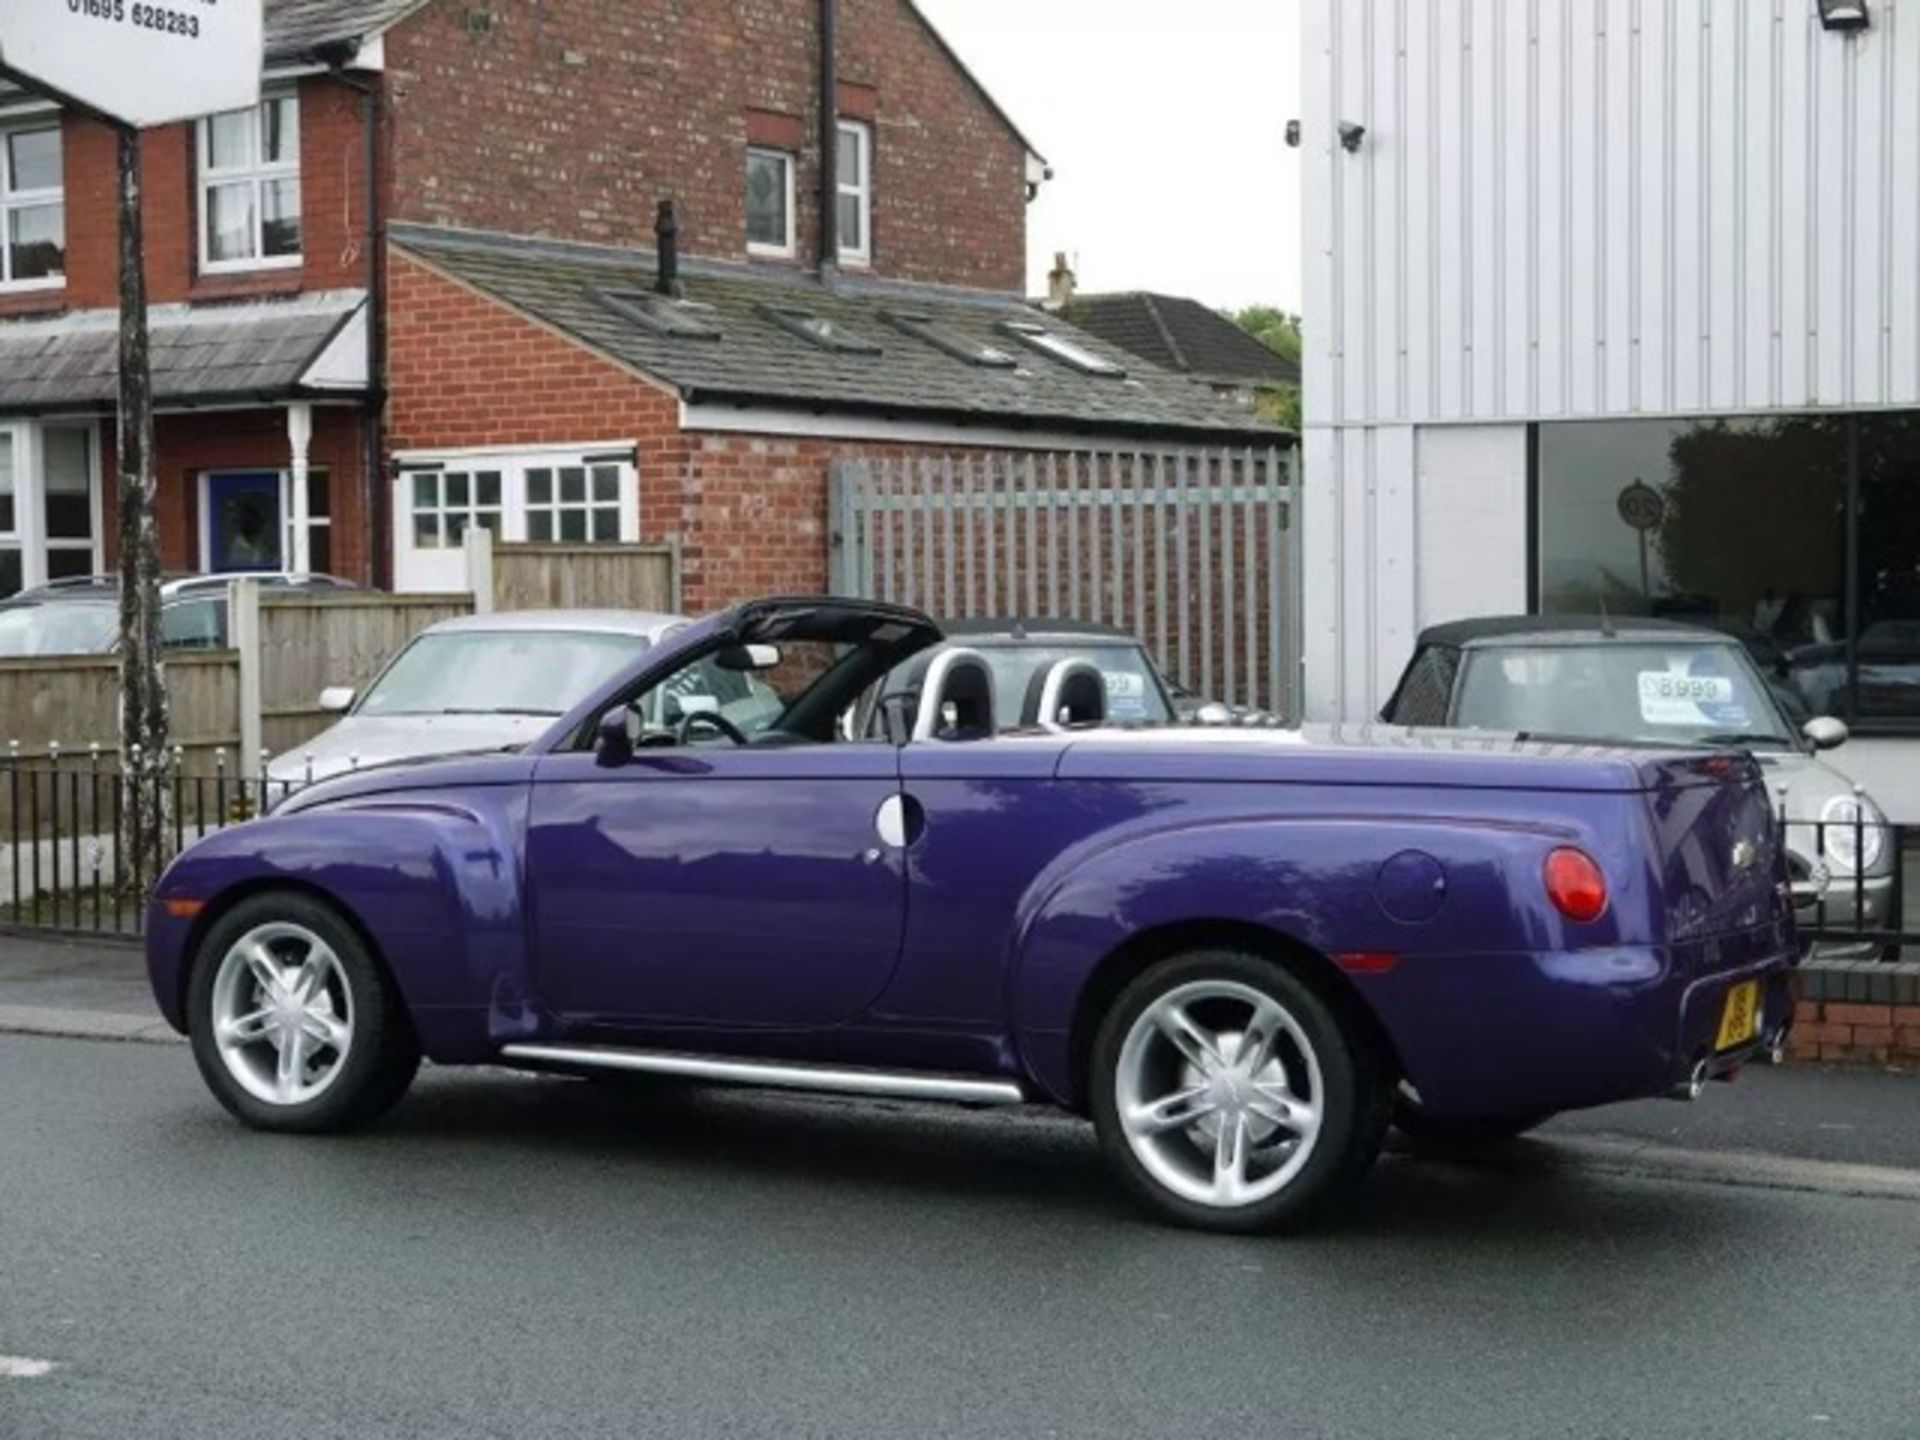 2005 CHEVROLET SSR IN LIMITED EDITION Ultra Violet Metallic - Image 7 of 33